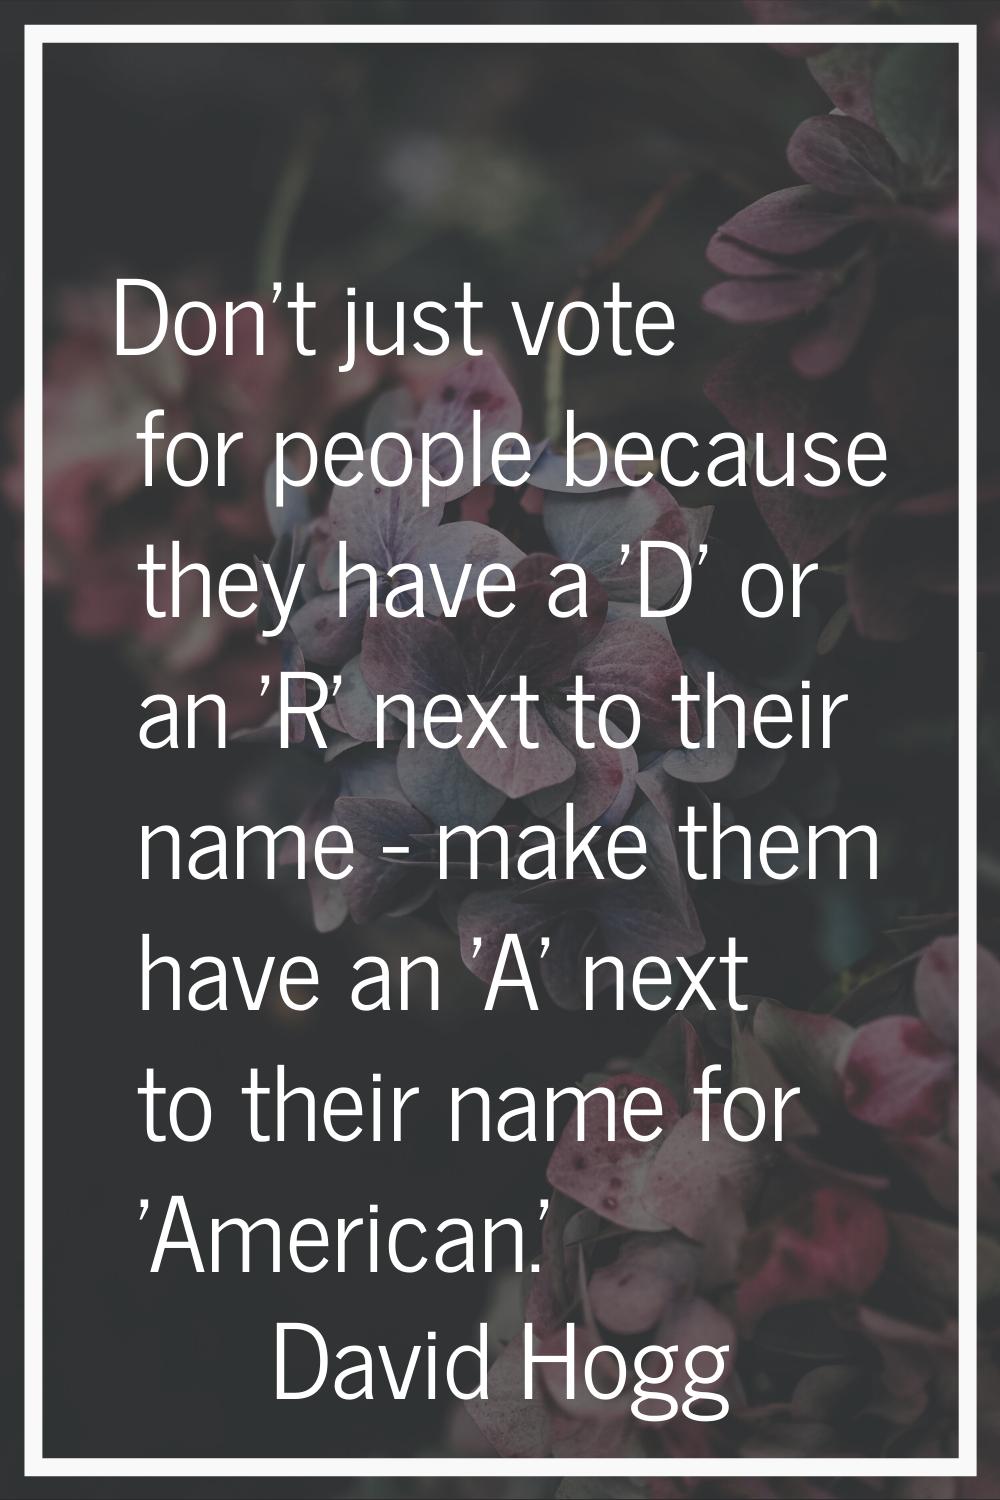 Don't just vote for people because they have a 'D' or an 'R' next to their name - make them have an